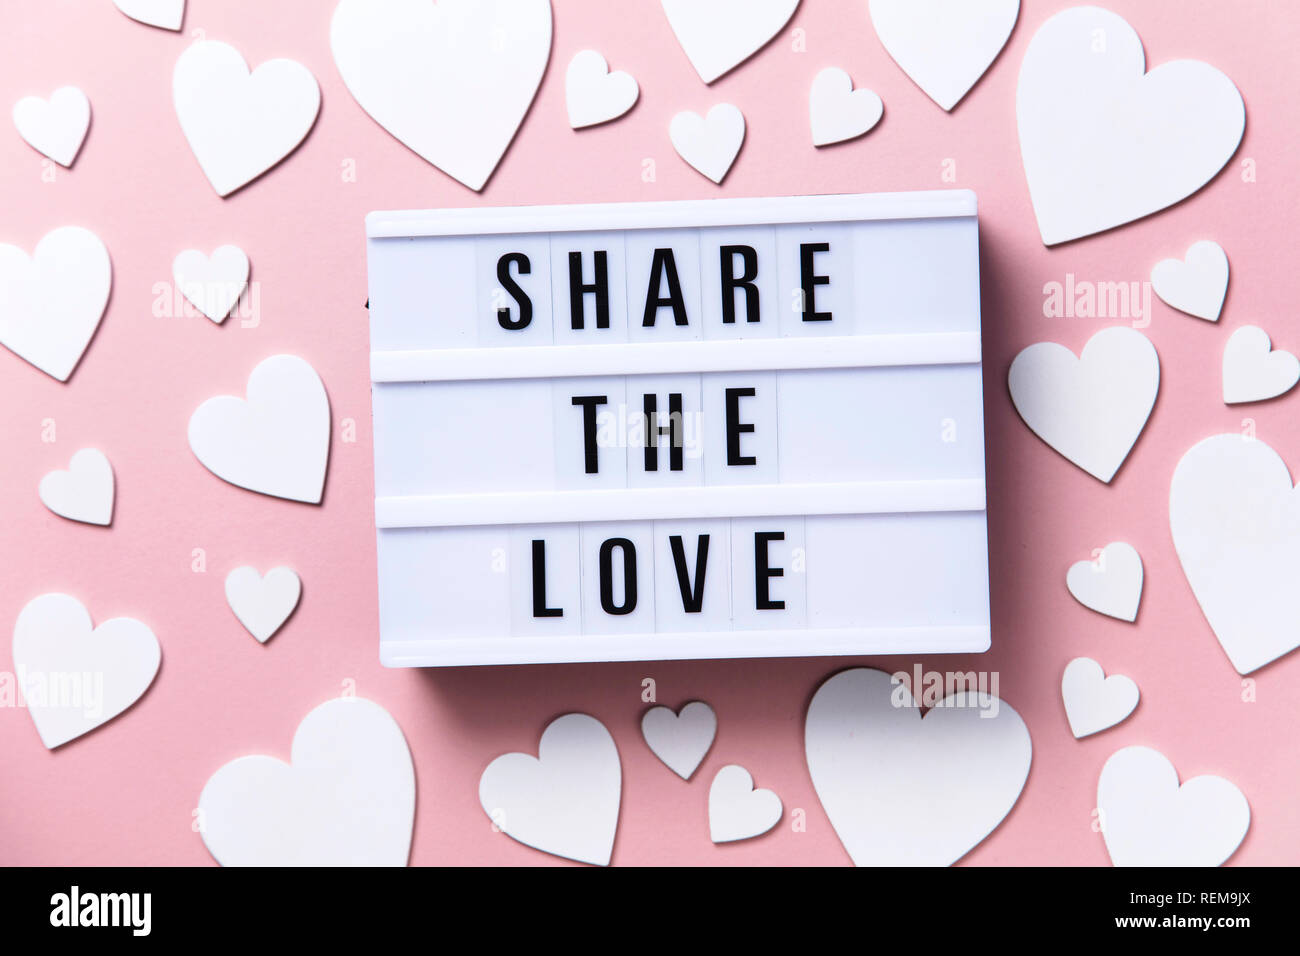 Share the Love lightbox message with white hearts on a pink background Stock Photo